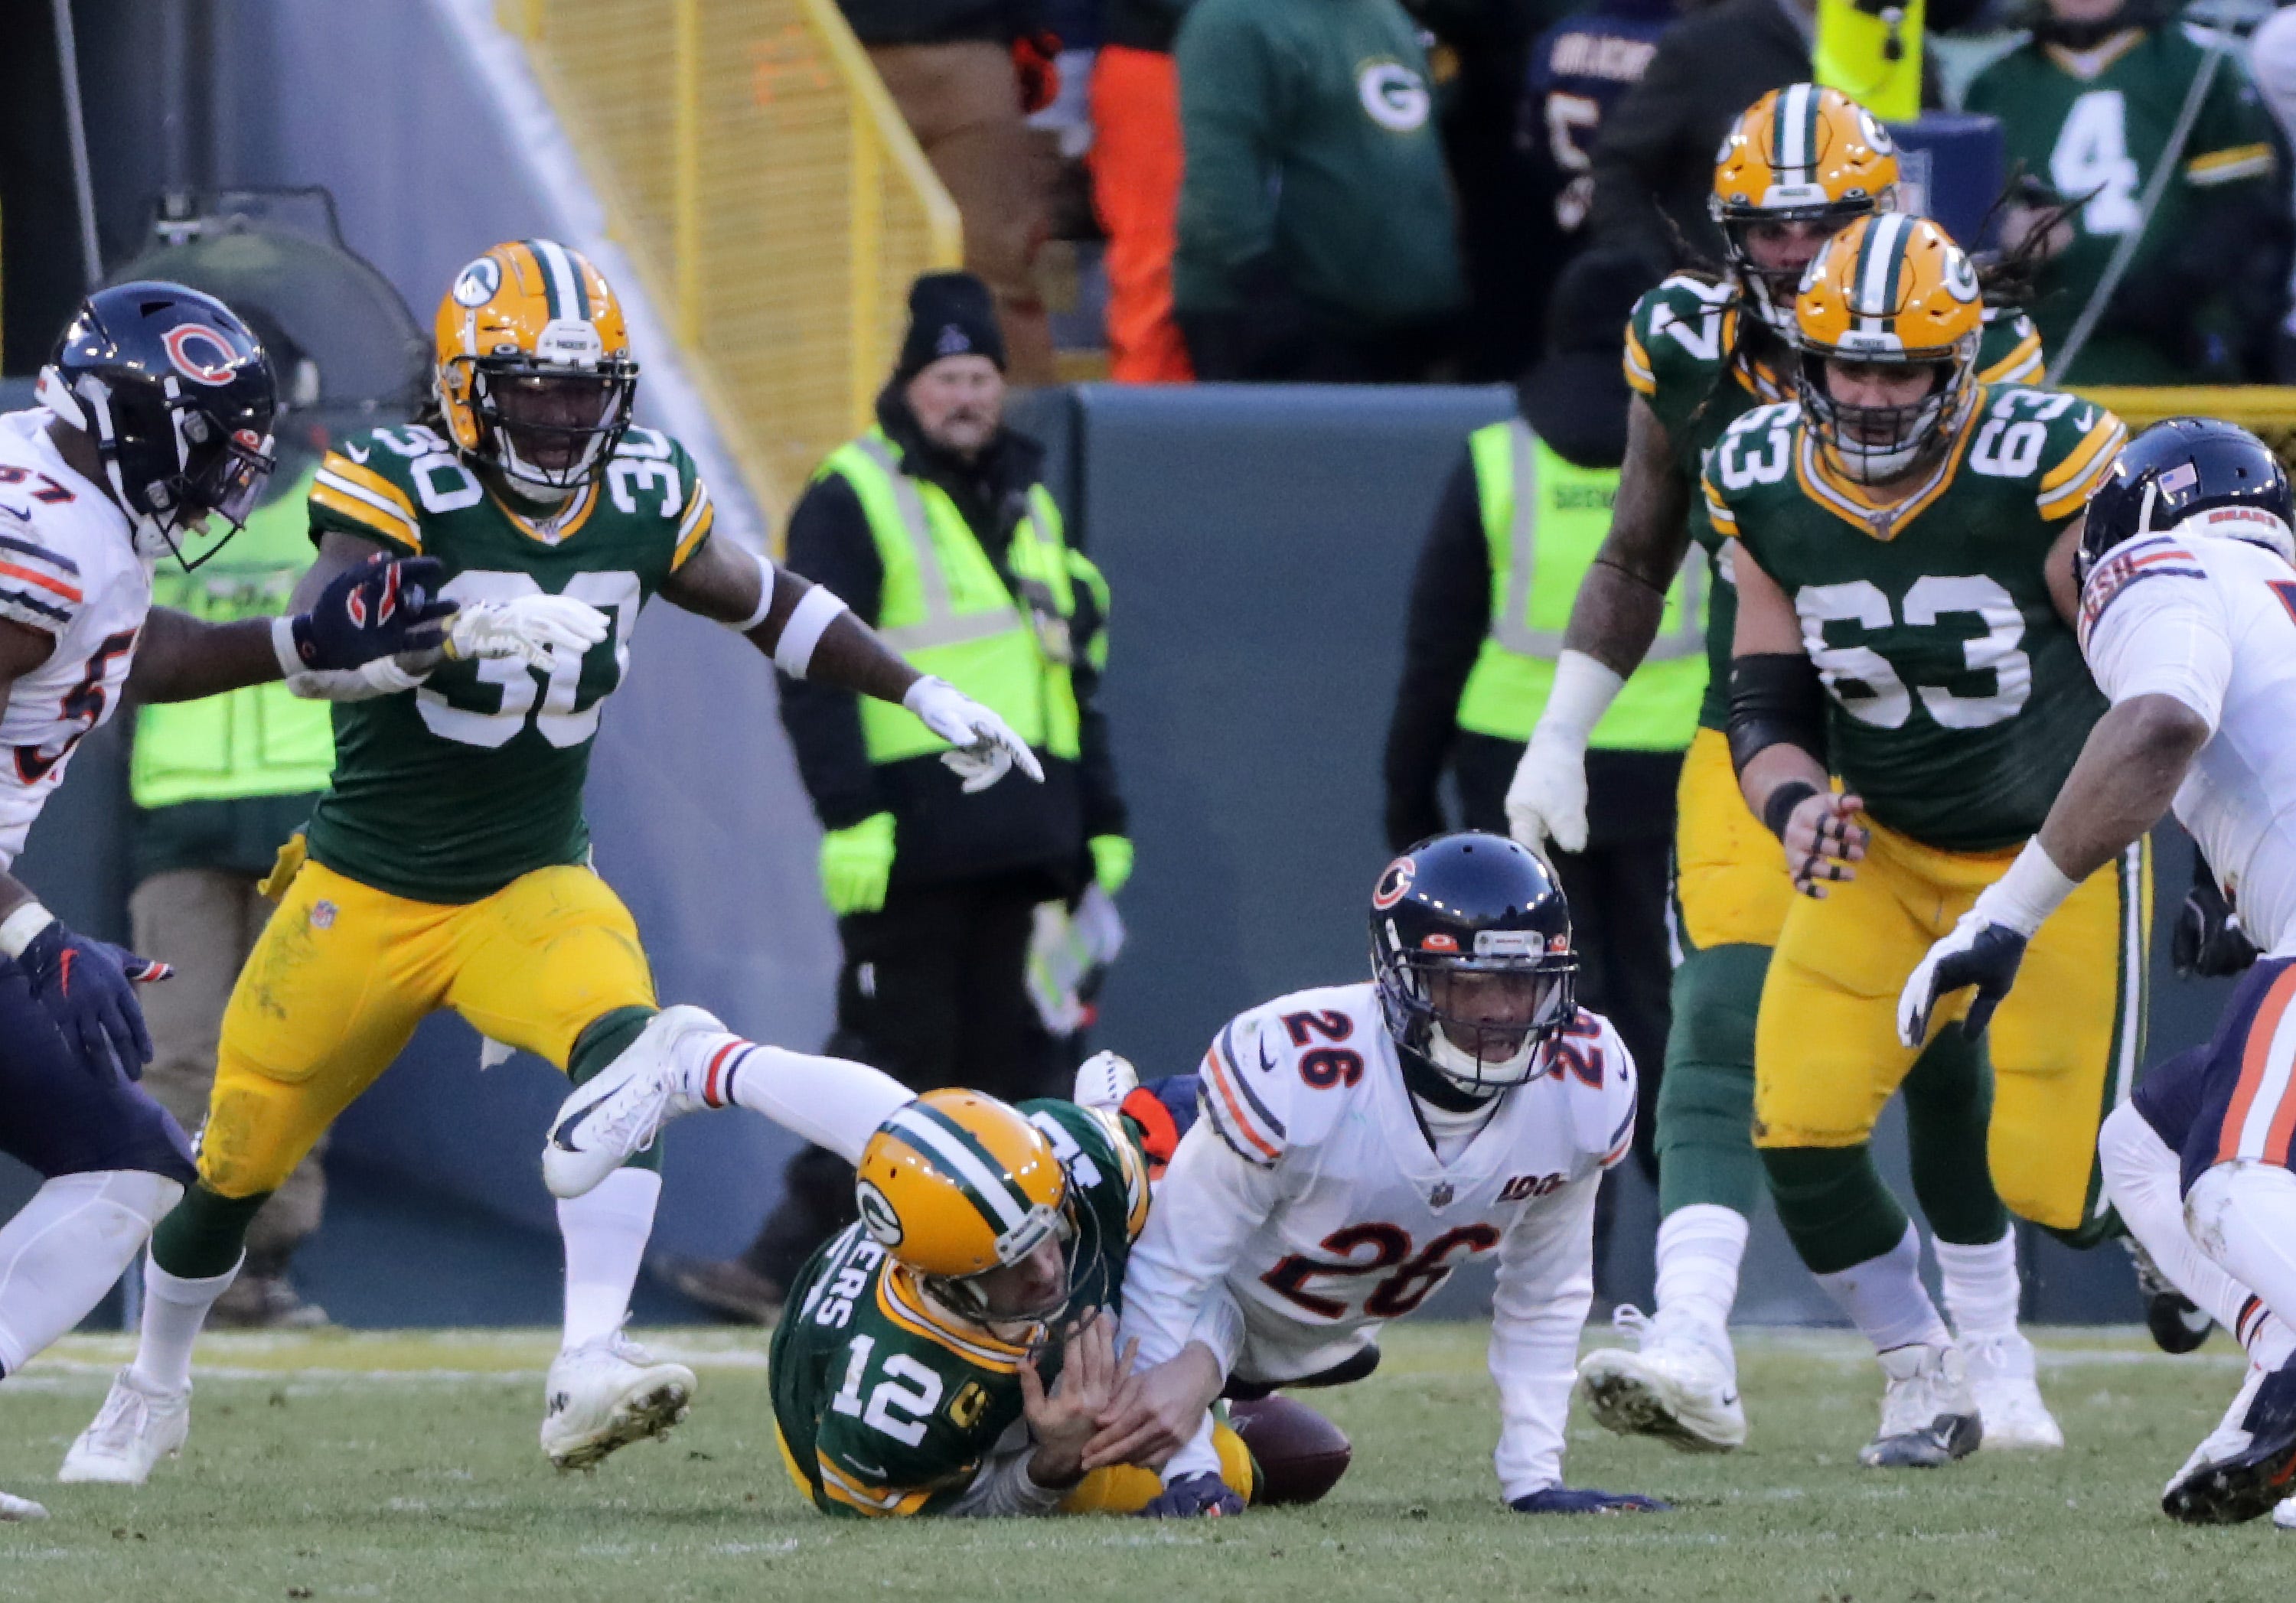 Chicago Bears defensive back Deon Bush (26) knoicks the ball losse while tackl;ing Green Bay Packers quarterback Aaron Rodgers (12) late in the fourth quarter during their football game on Sunday, December 15, 2019, at Lambeau Field in Green Bay, Wis. Rodgers was ruled down.